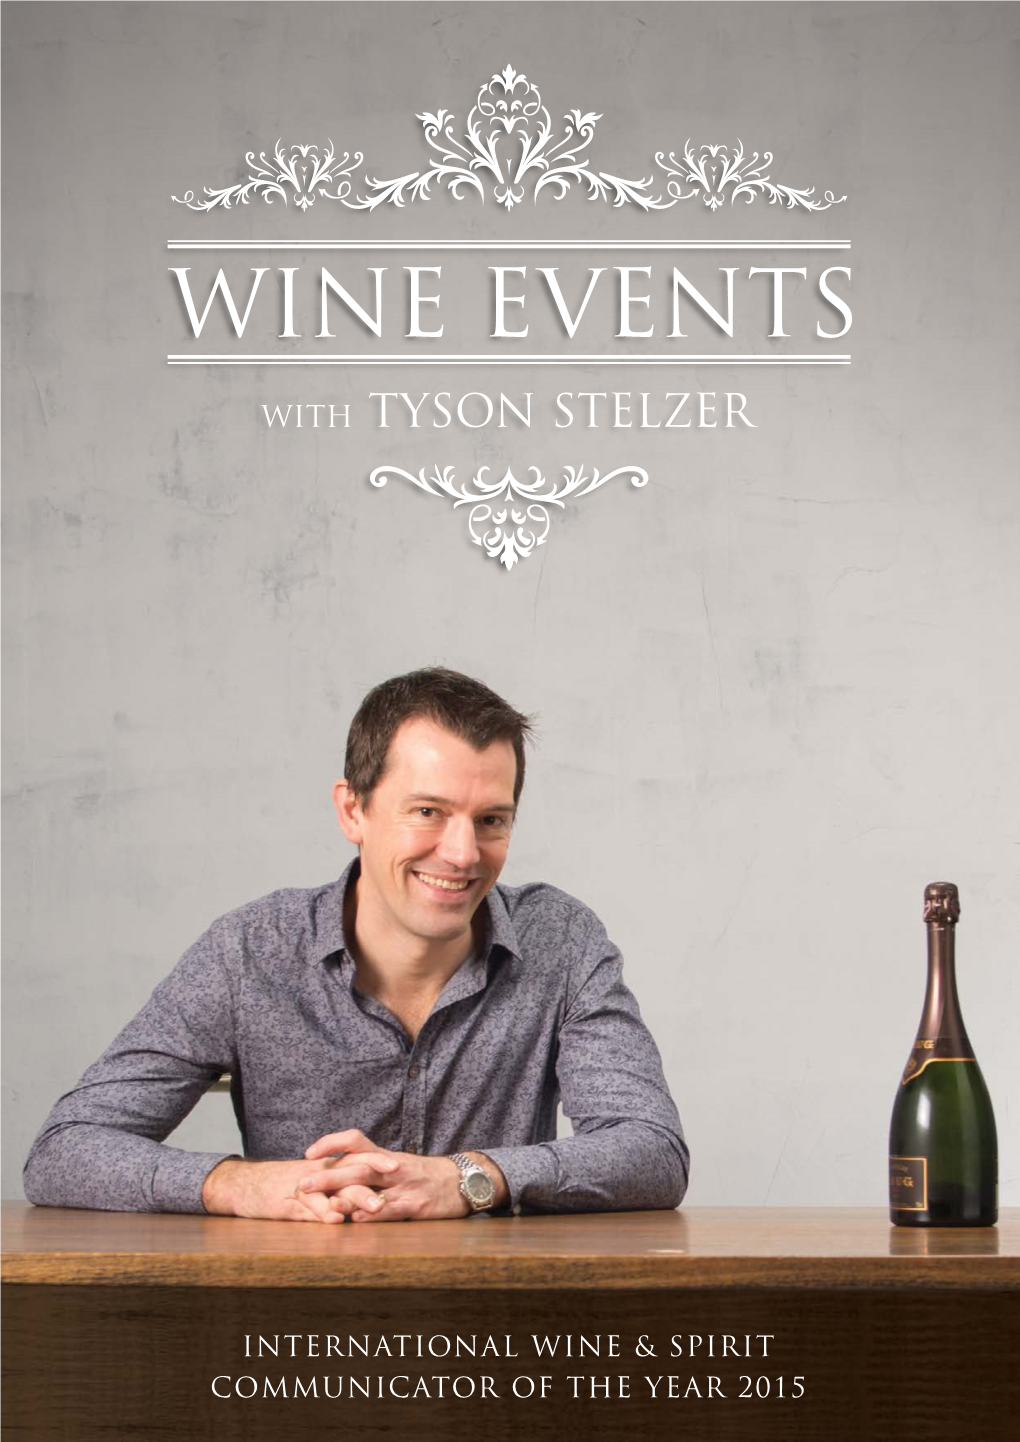 Read More About Wine Events with Tyson